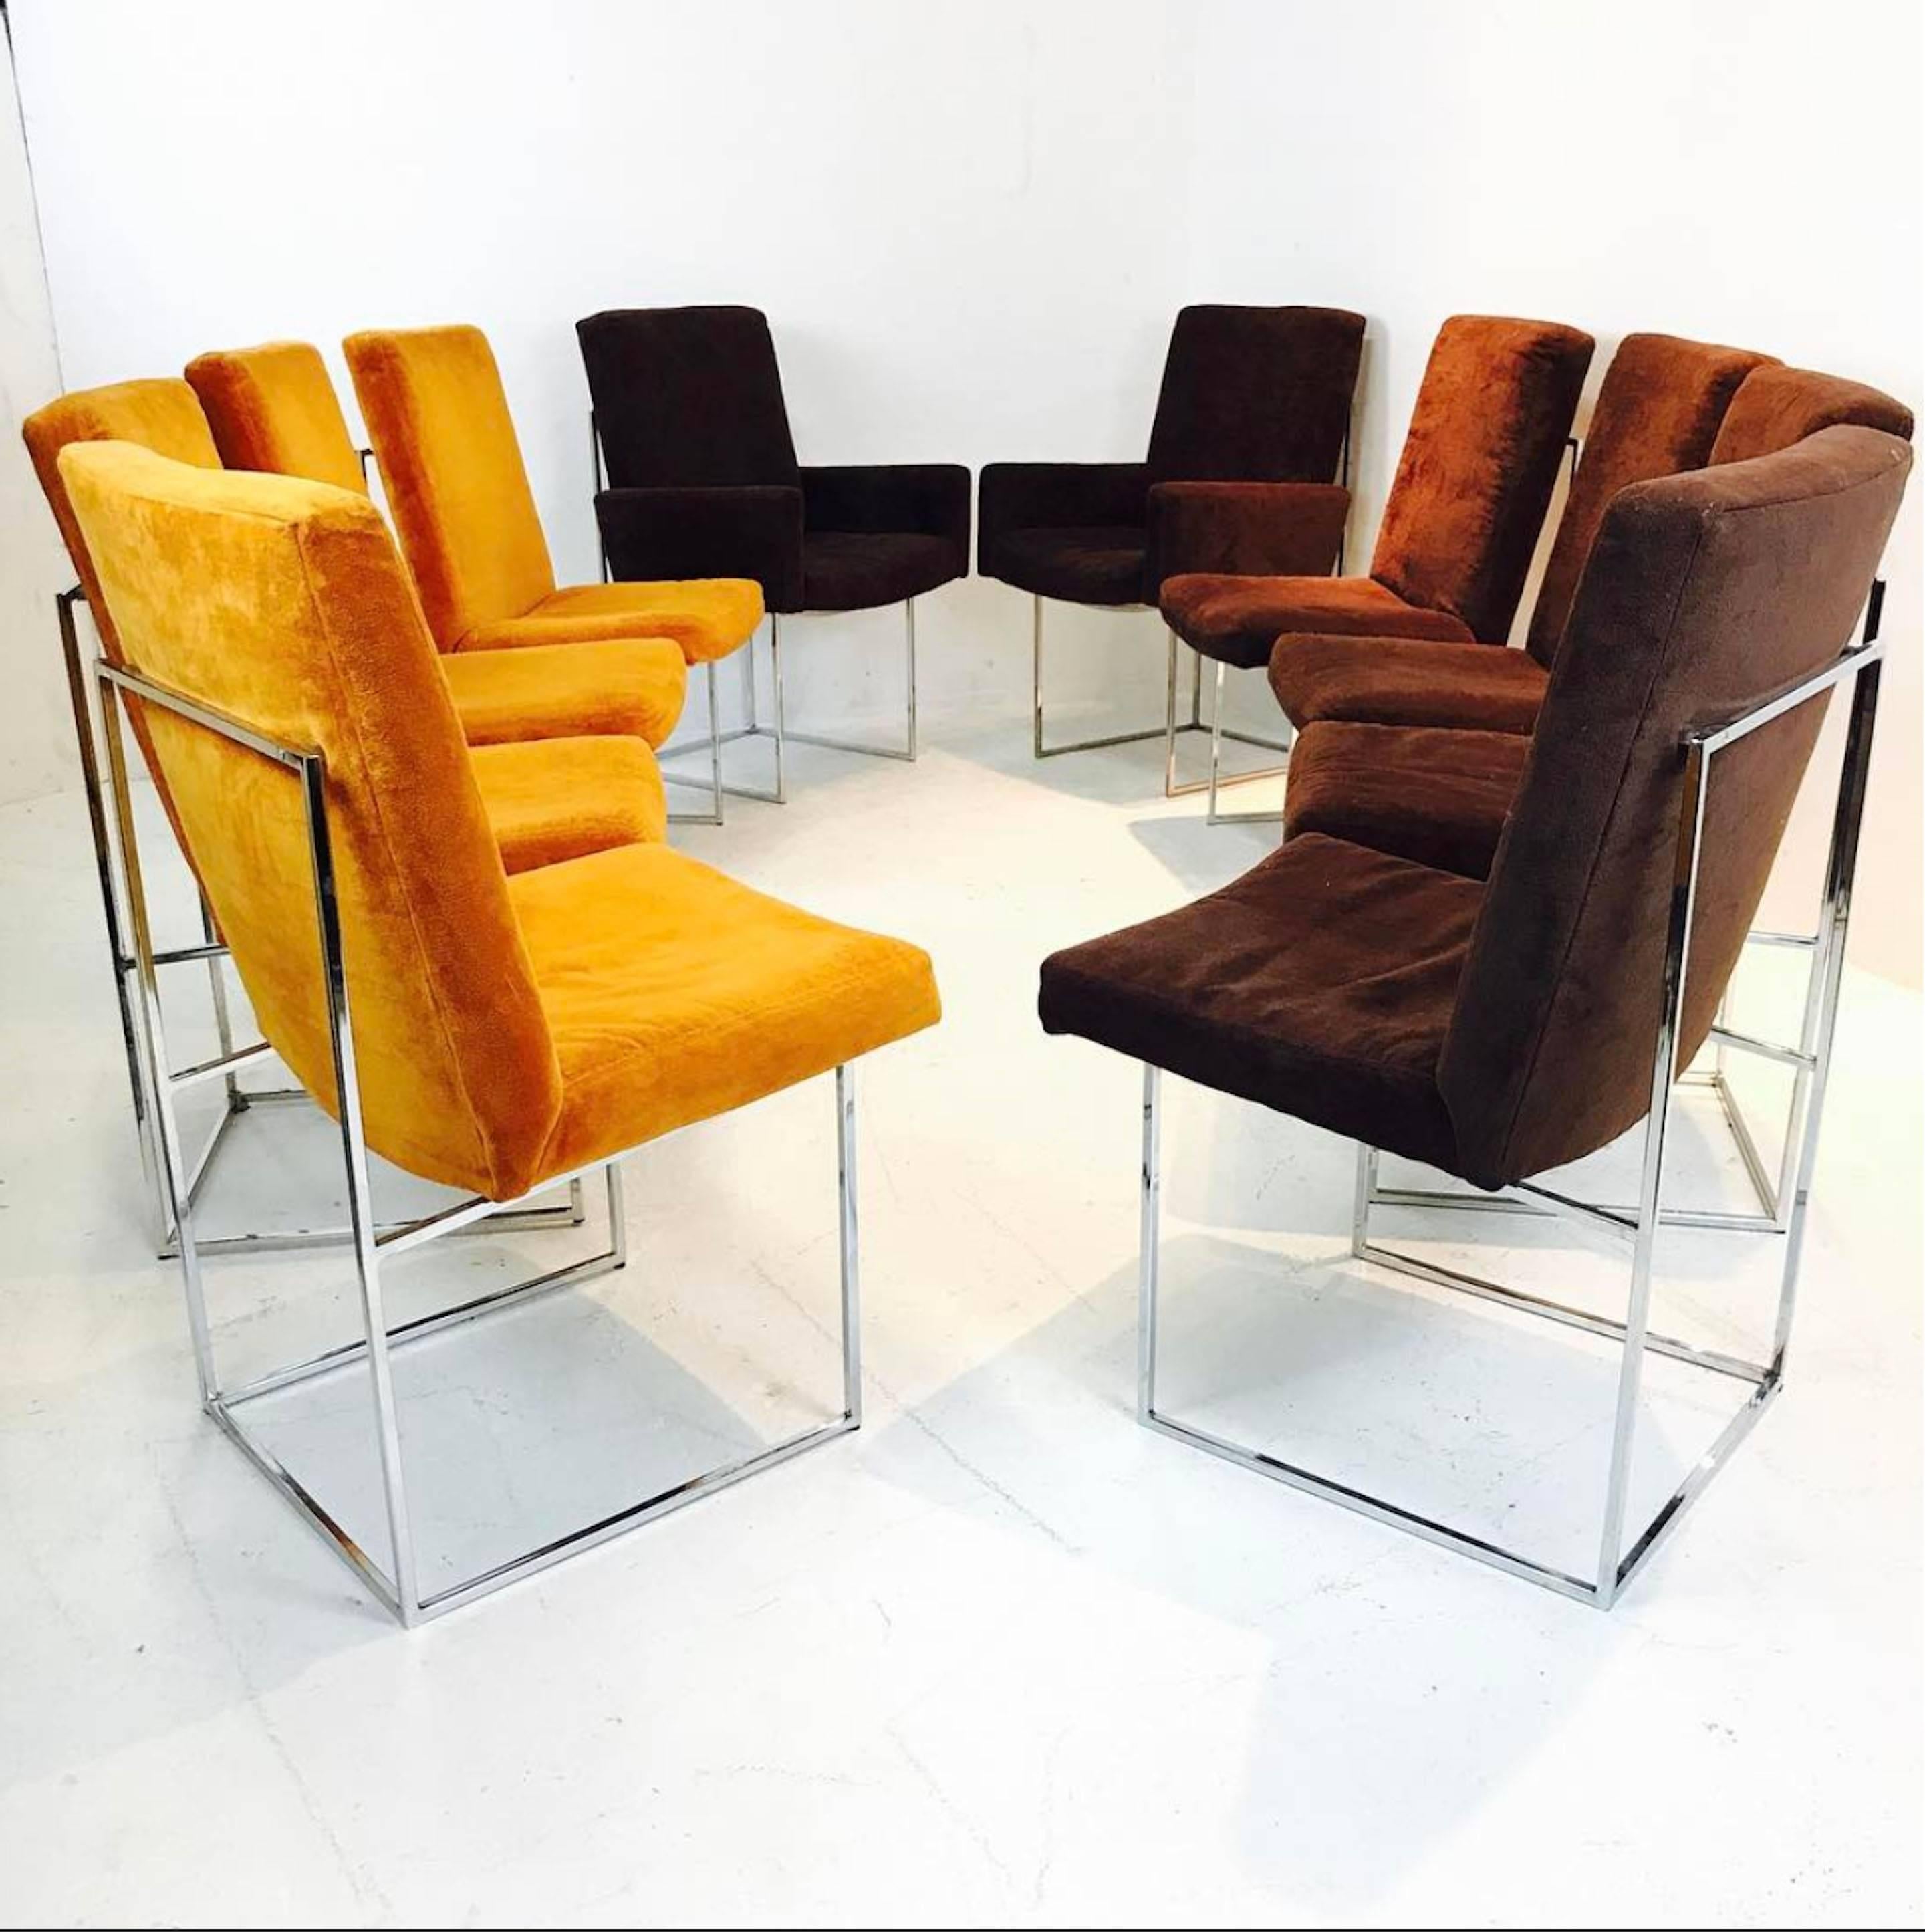 Set of ten Milo Baughman brown and orange velvet and chrome dining chairs. There are two are chairs and six side chairs. Chrome is in excellent vintage condition. New upholstery is recommended.

Dimensions: 20"W x 23"D x 36.5"T.
Seat